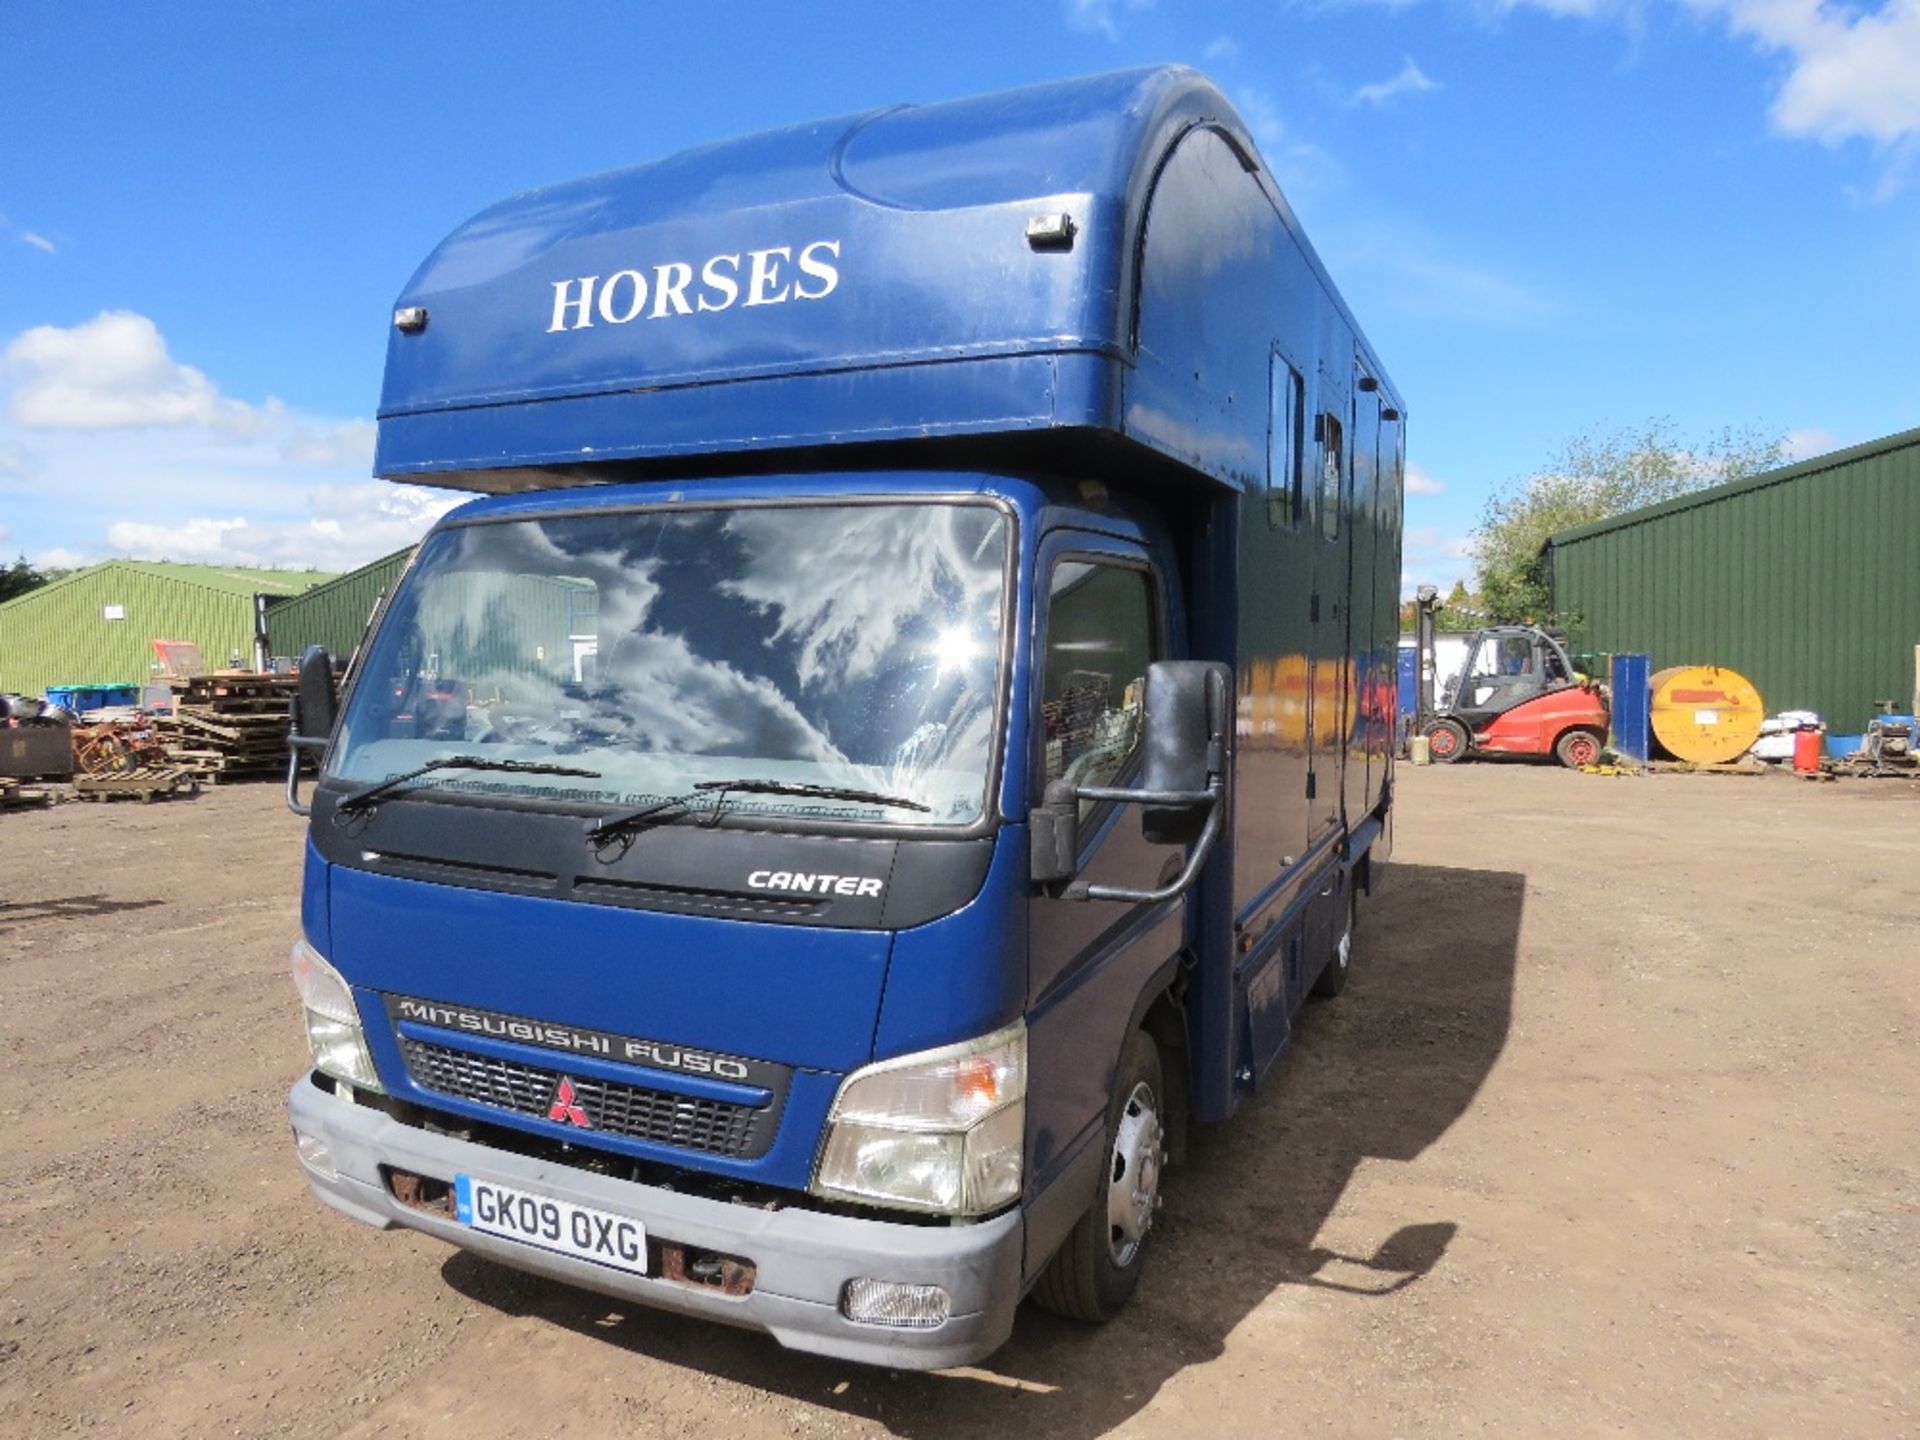 MITSUBISHI CANTER HORSE BOX LORRY REG:GK09 OXG. V5 AND PLATING CERTIFICATE IN OFFICE. MOT EXPIRED. - Bild 4 aus 24